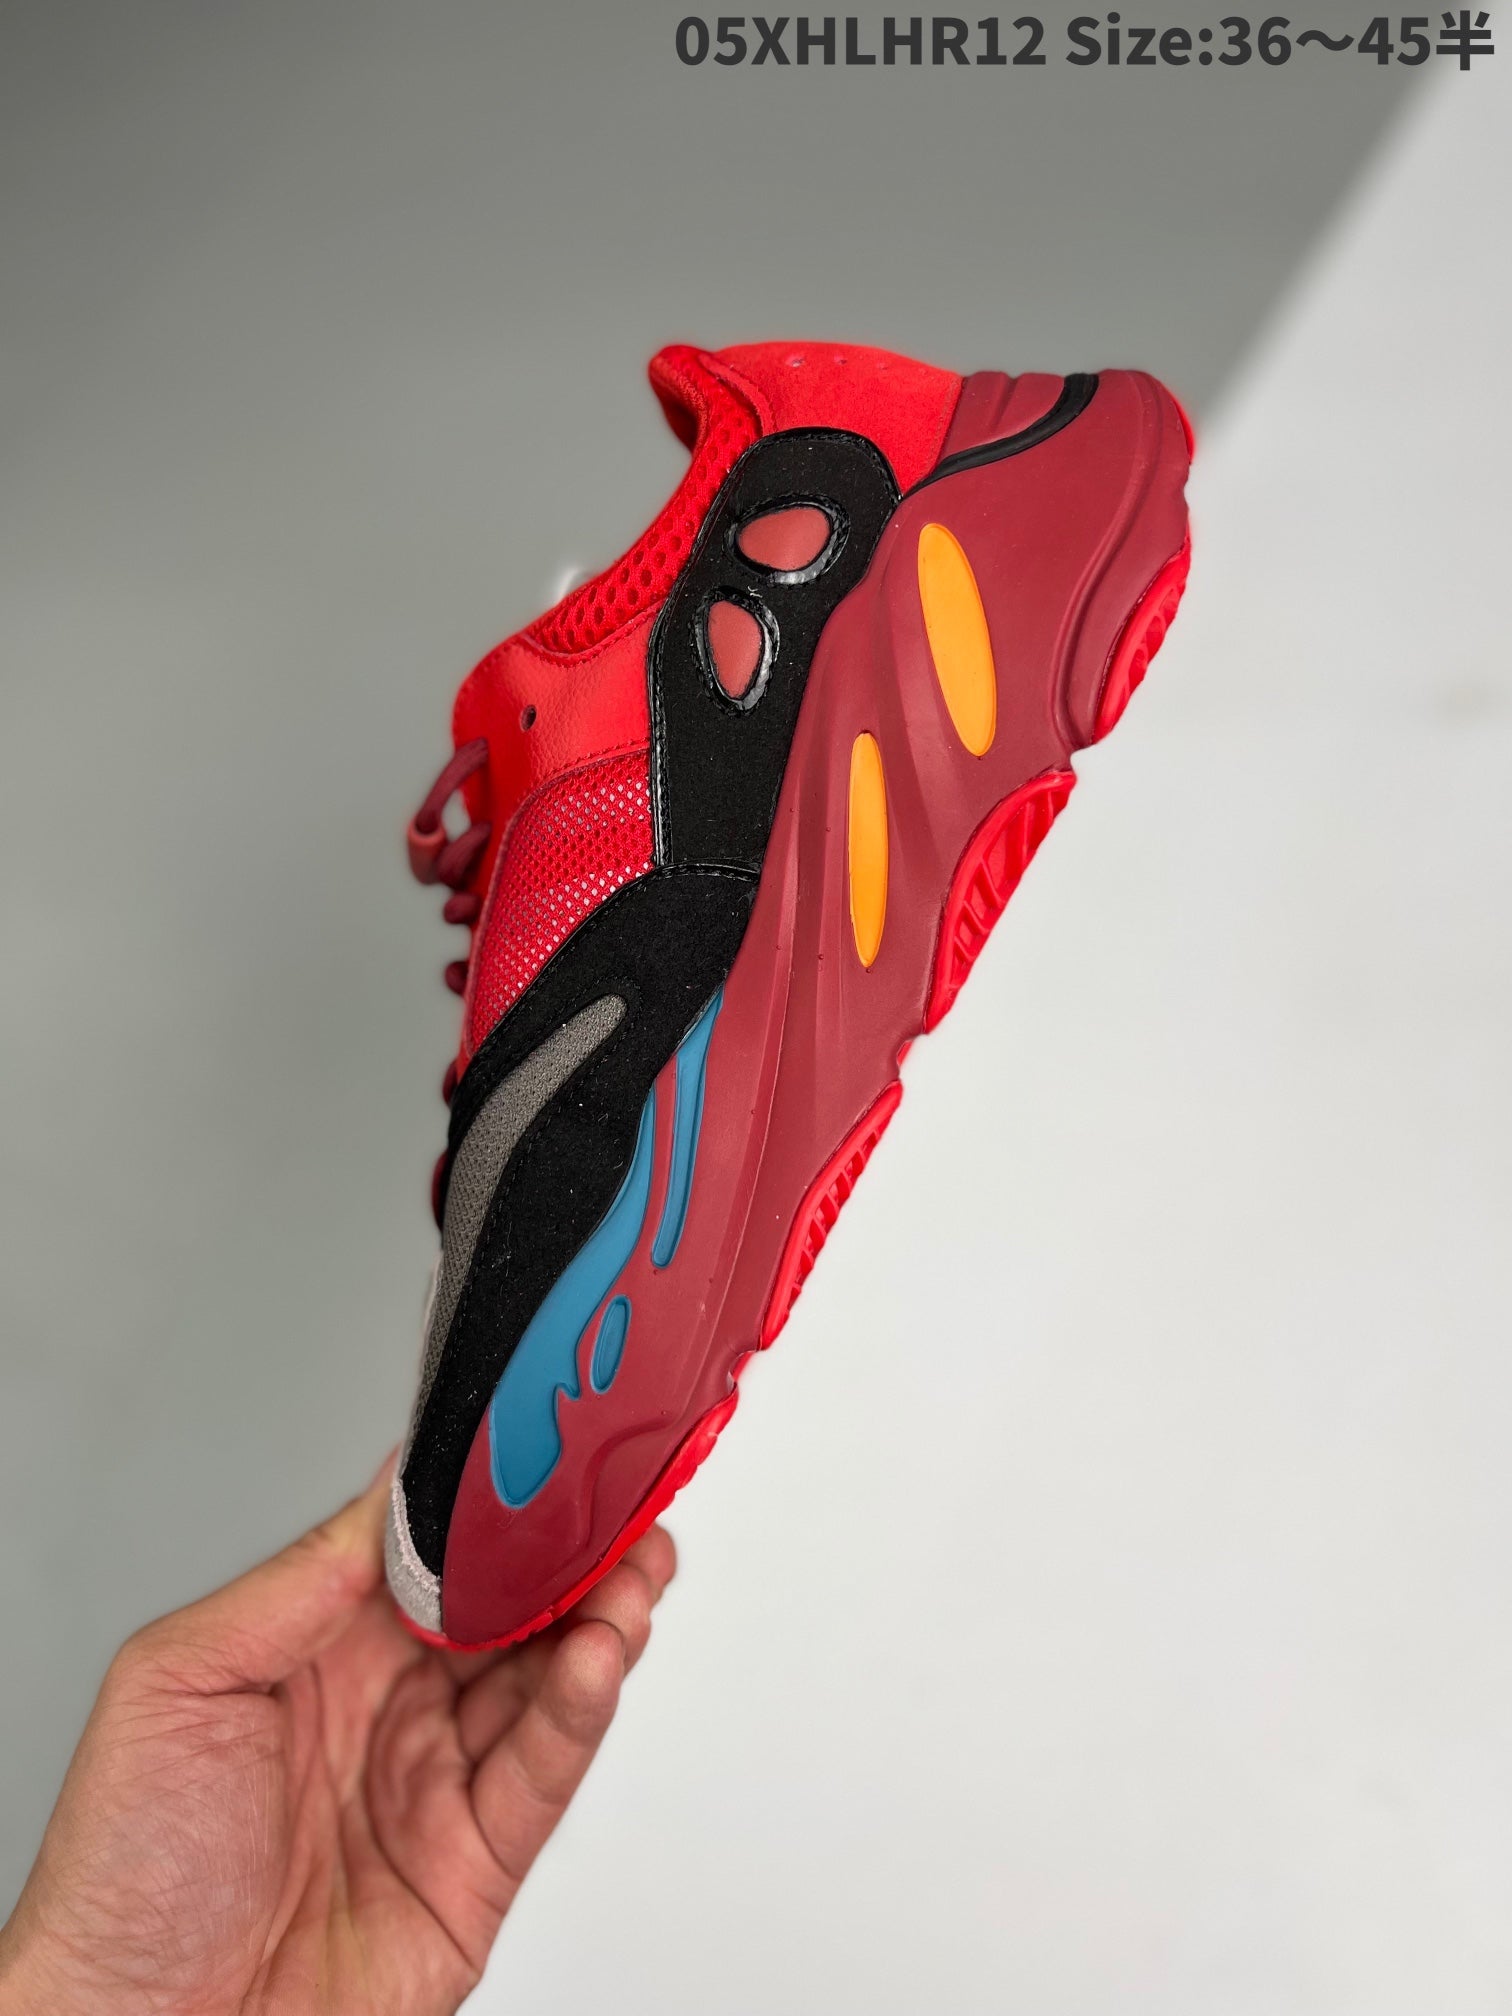 Adidas Yeezy Boost 700 Hi-Res Red Sneakers Shoes